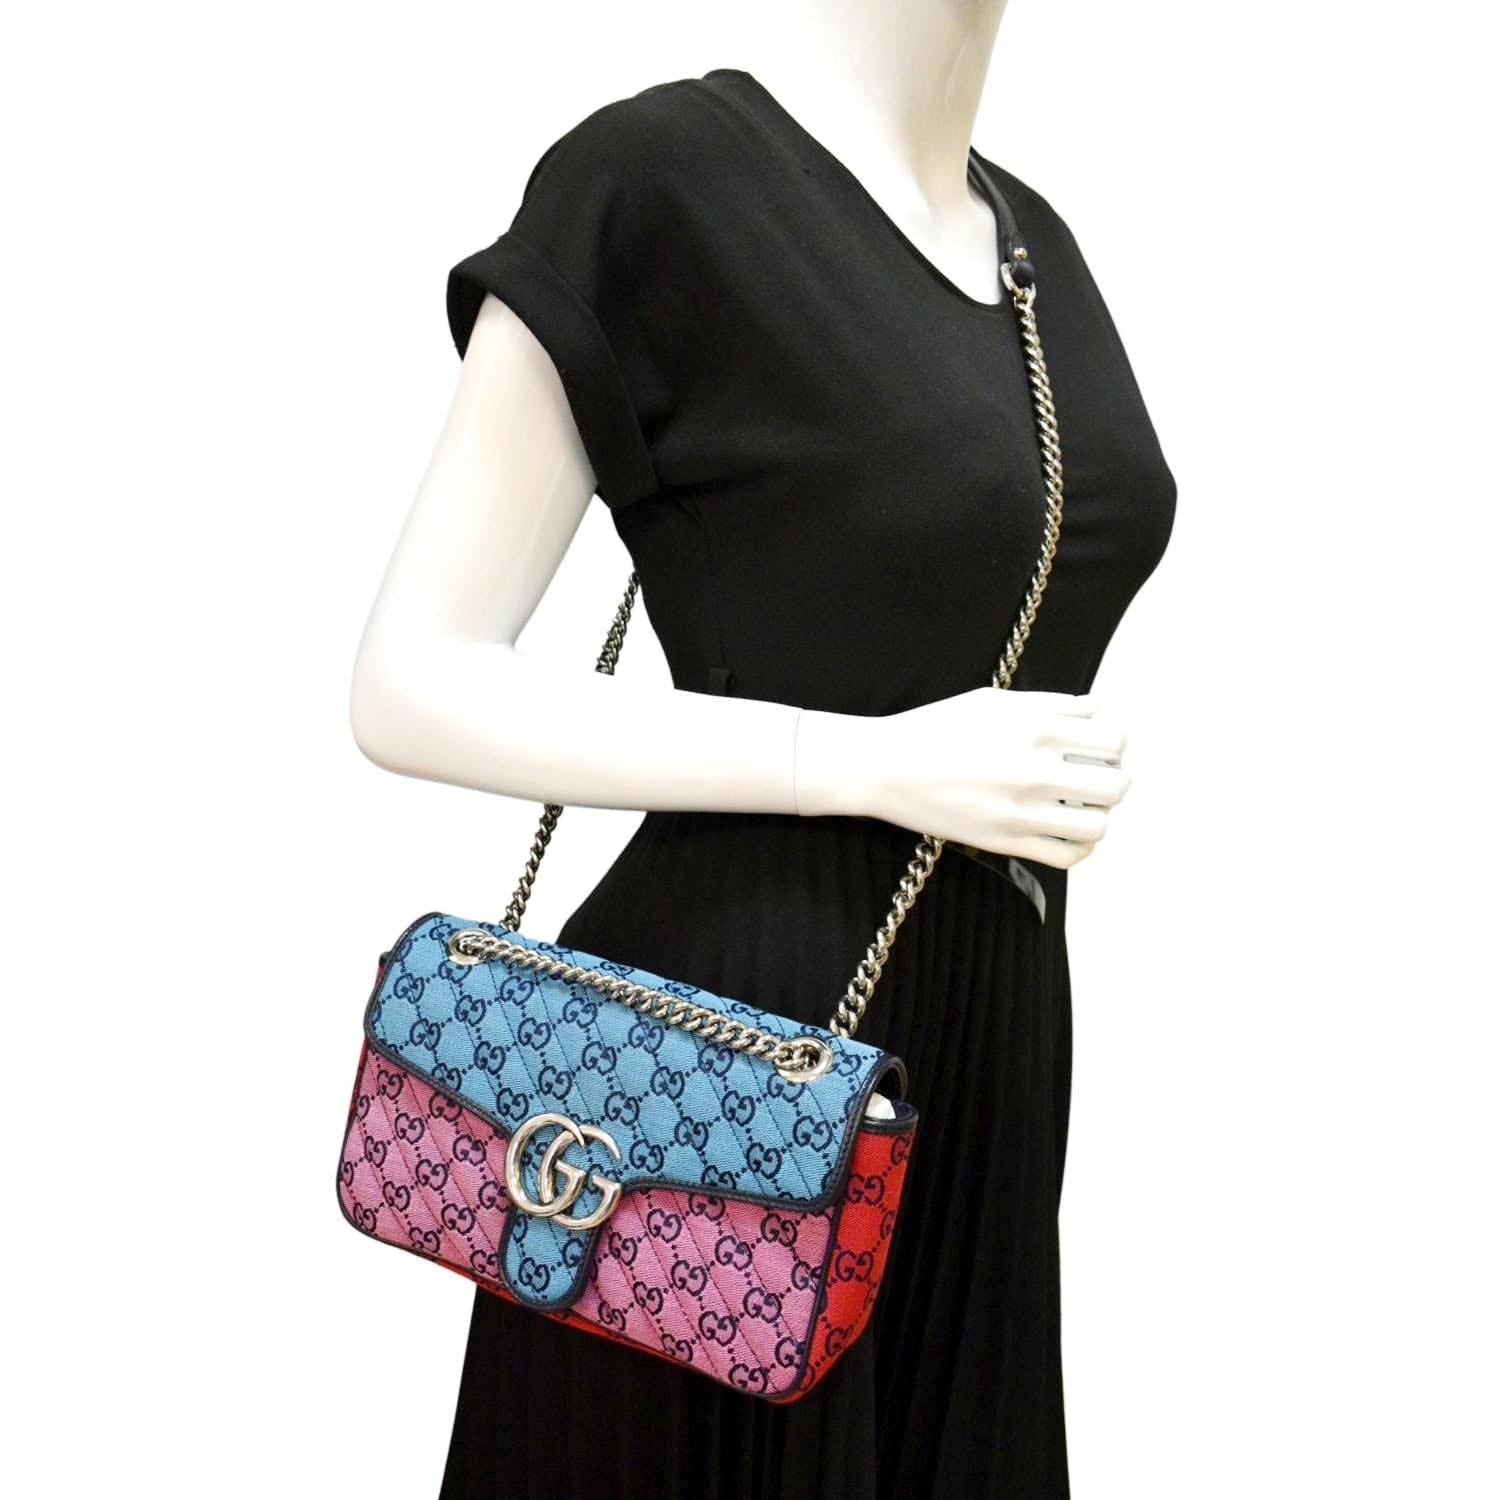 Gucci Double G Crossbody Bags for Women